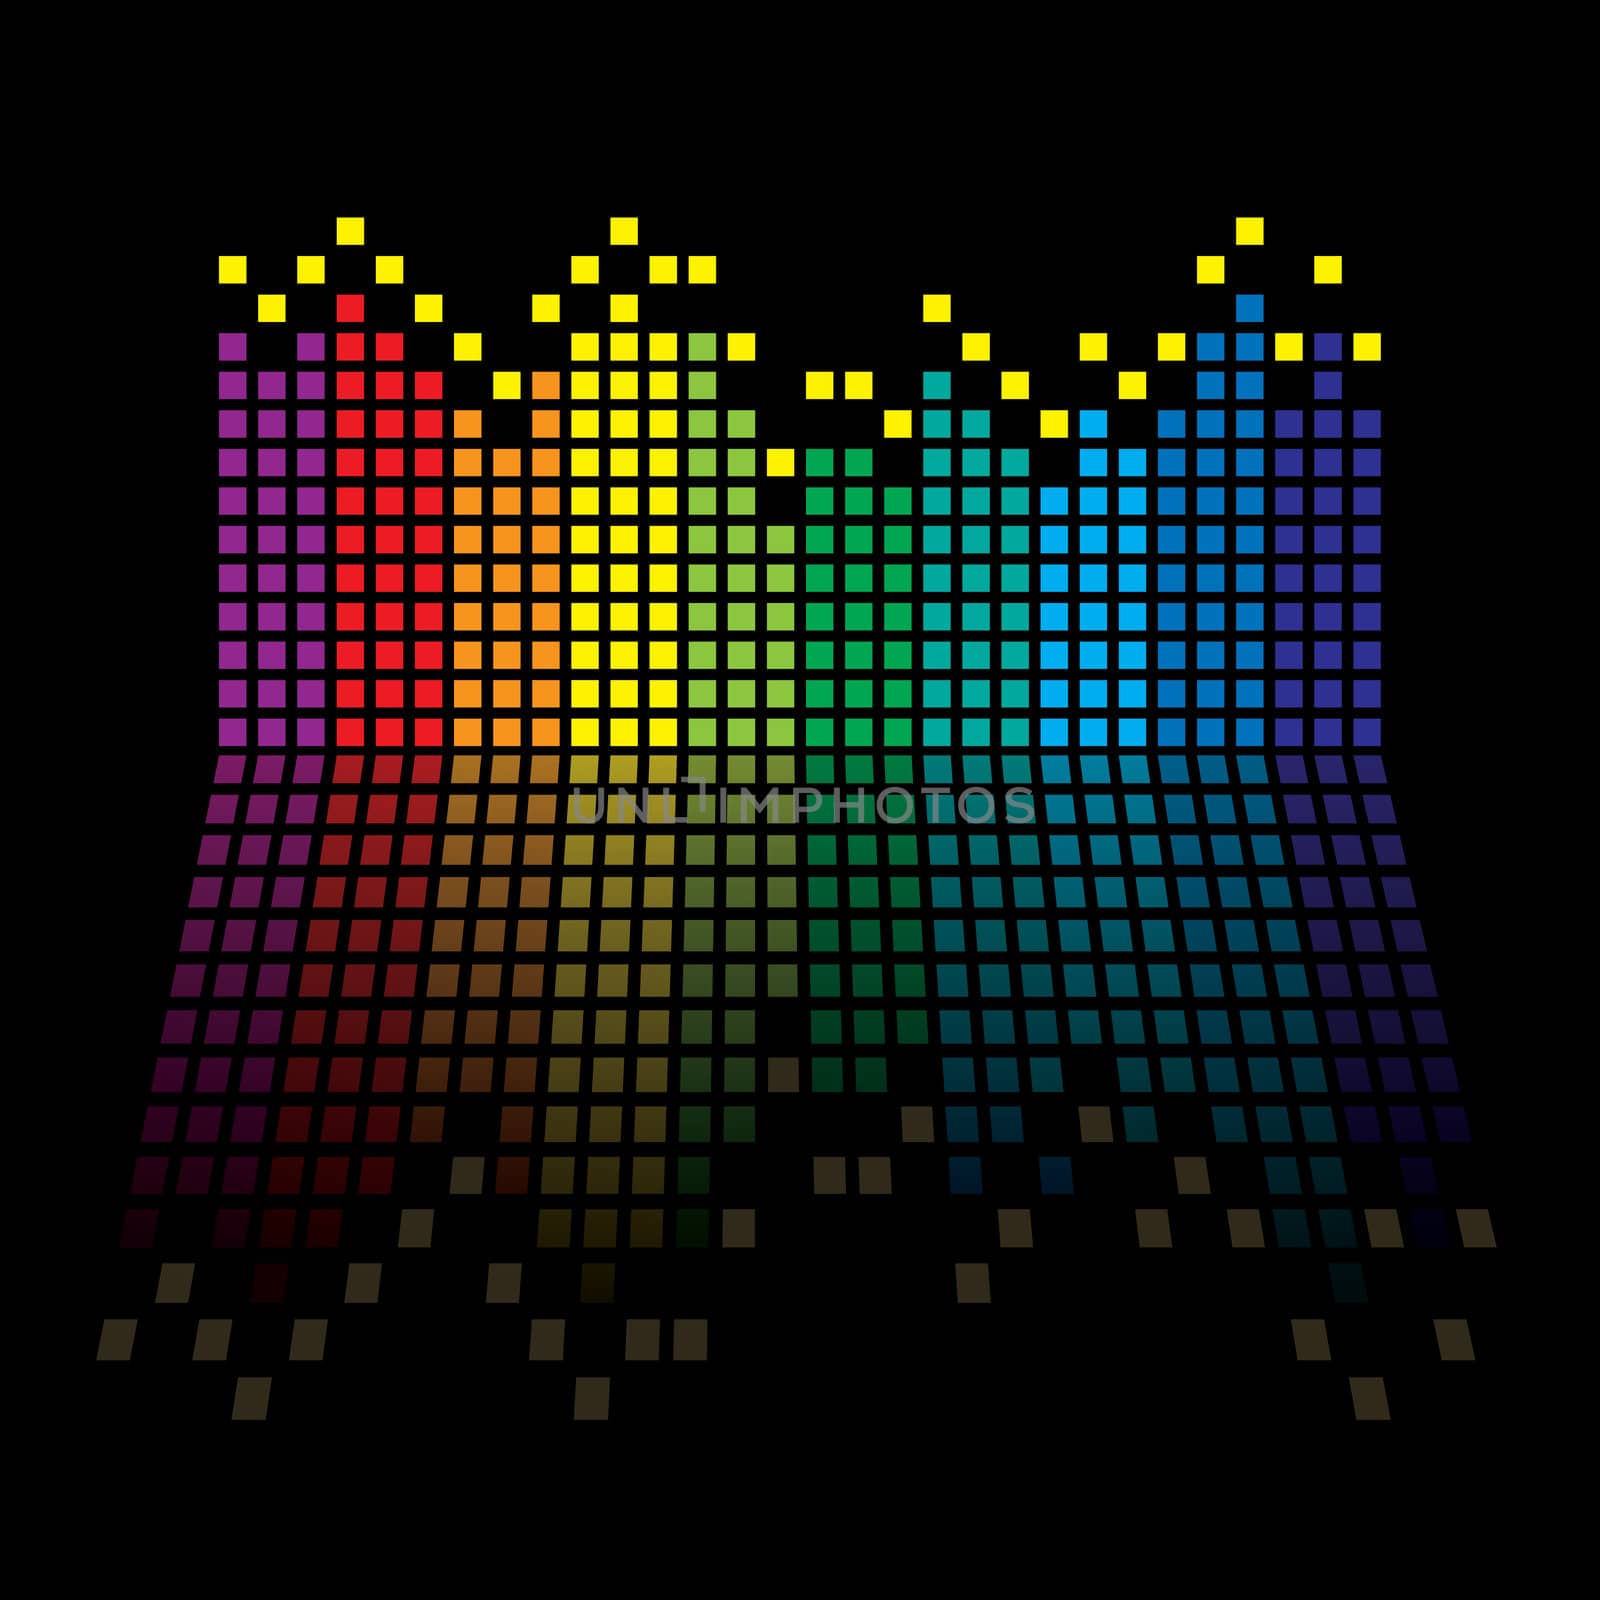 Rainbow music graphic equaliser with reflection in black background